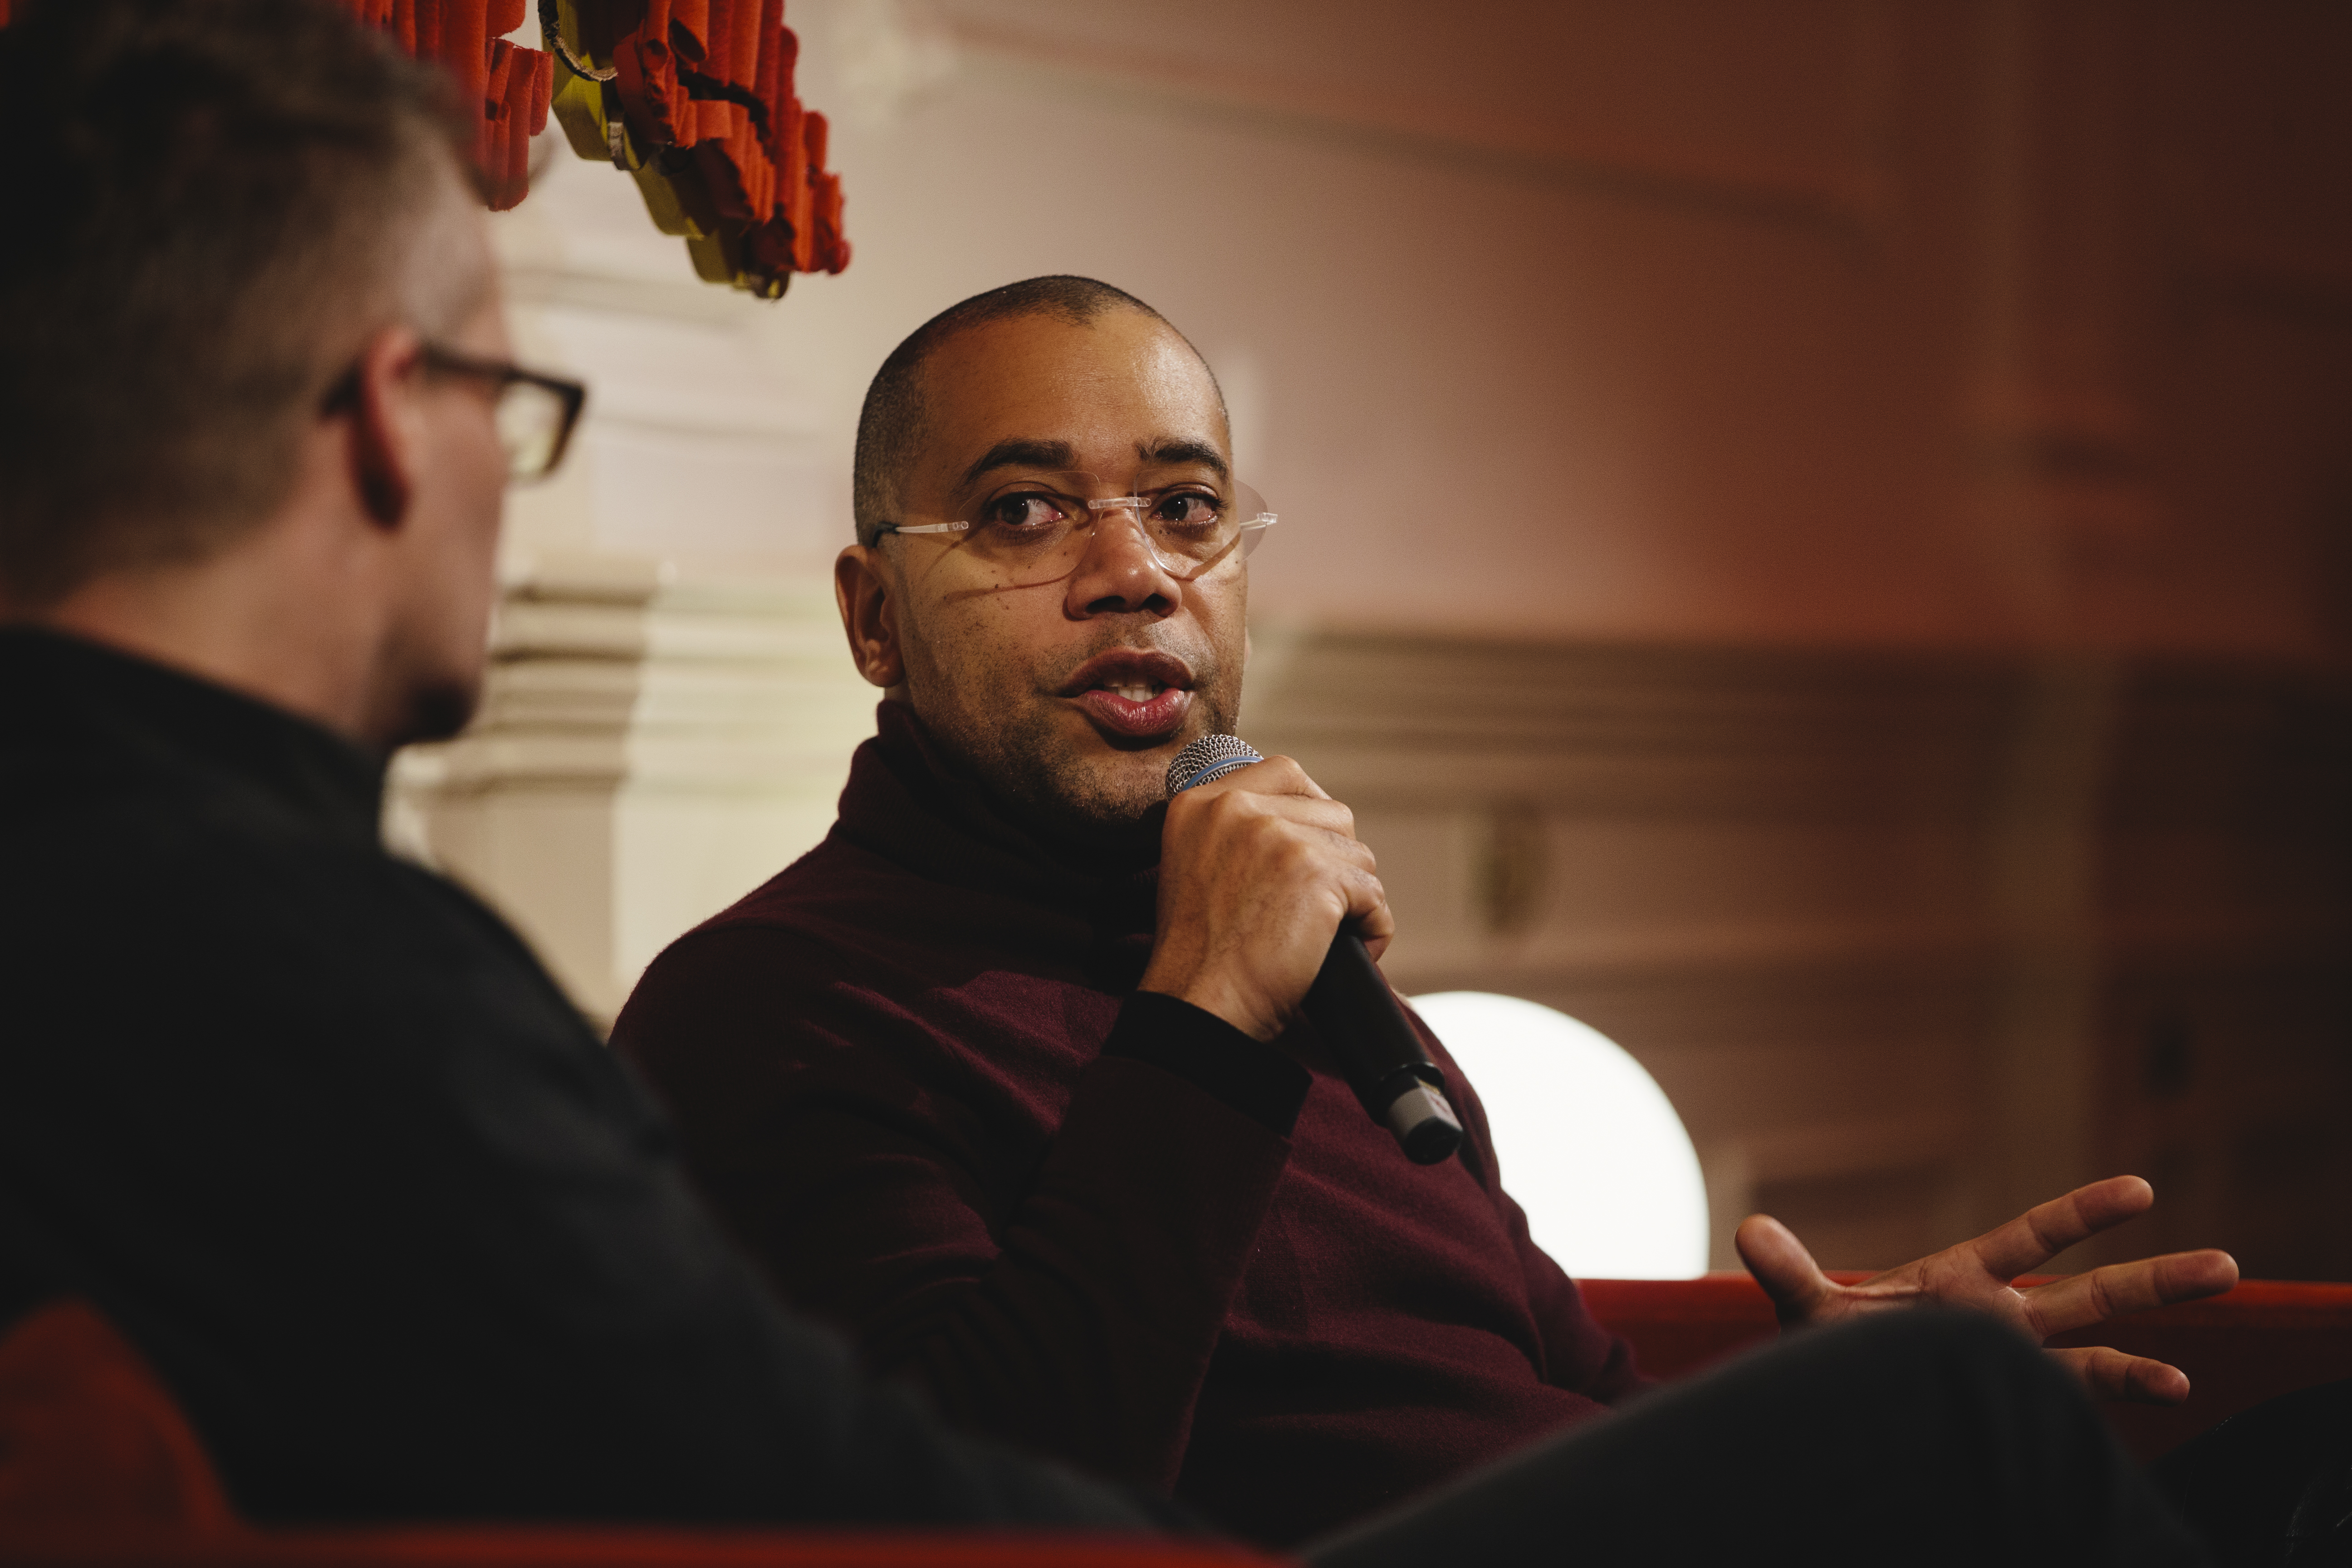 Patrick Pulsinger and Carl Craig at the Red Bull Music Academy Junge Roemer Lecture at the Ballhaus Vienna, Austria on January 27th, 2017